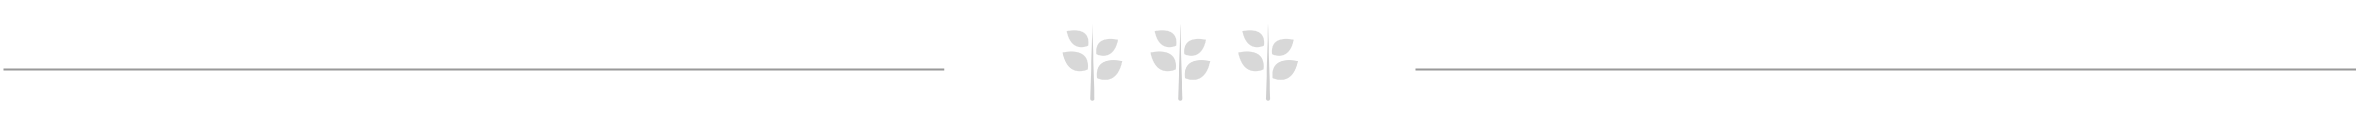 Page separator with three leaves in the middle